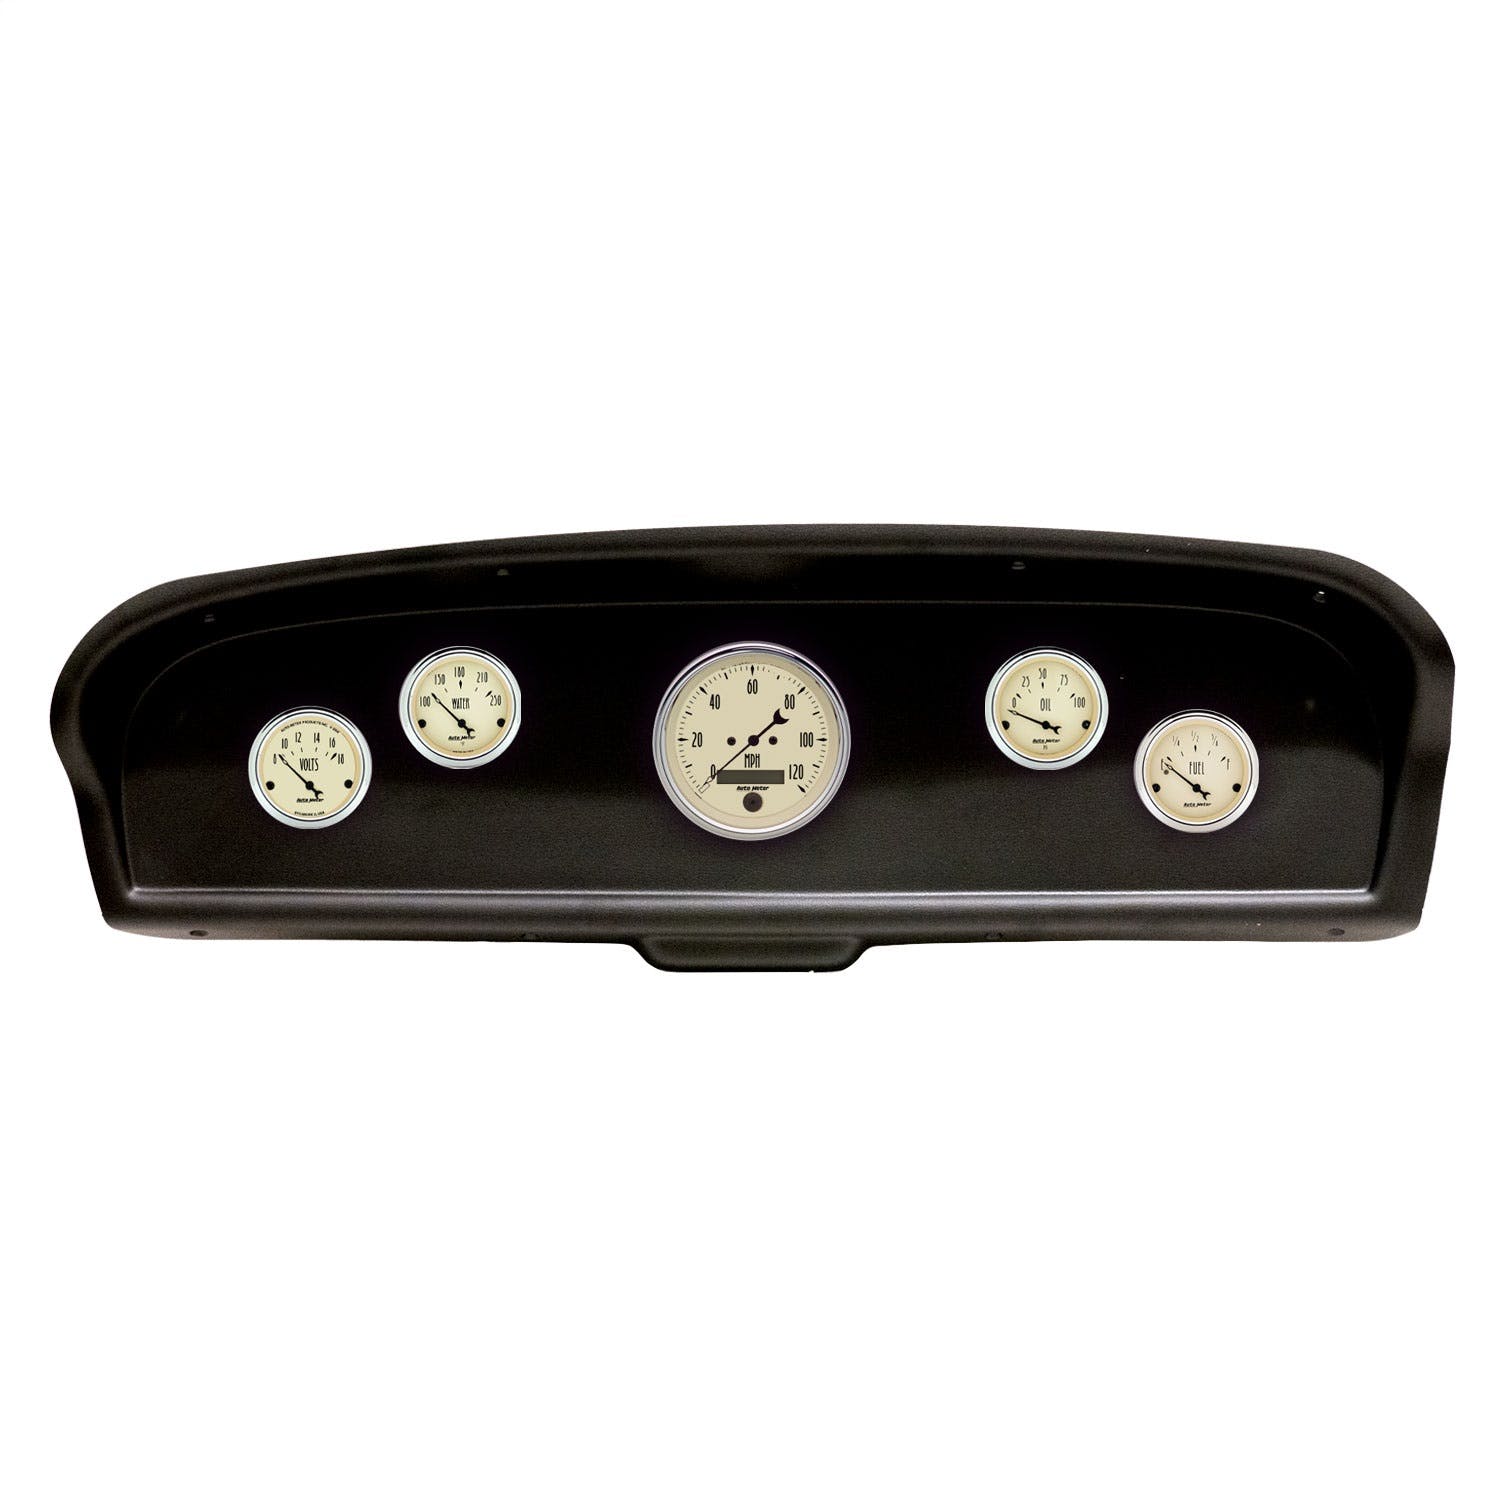 AutoMeter Products 2105-02 5 Gauge Direct-Fit Dash Kit, Ford Truck 61-66, Antique Beige